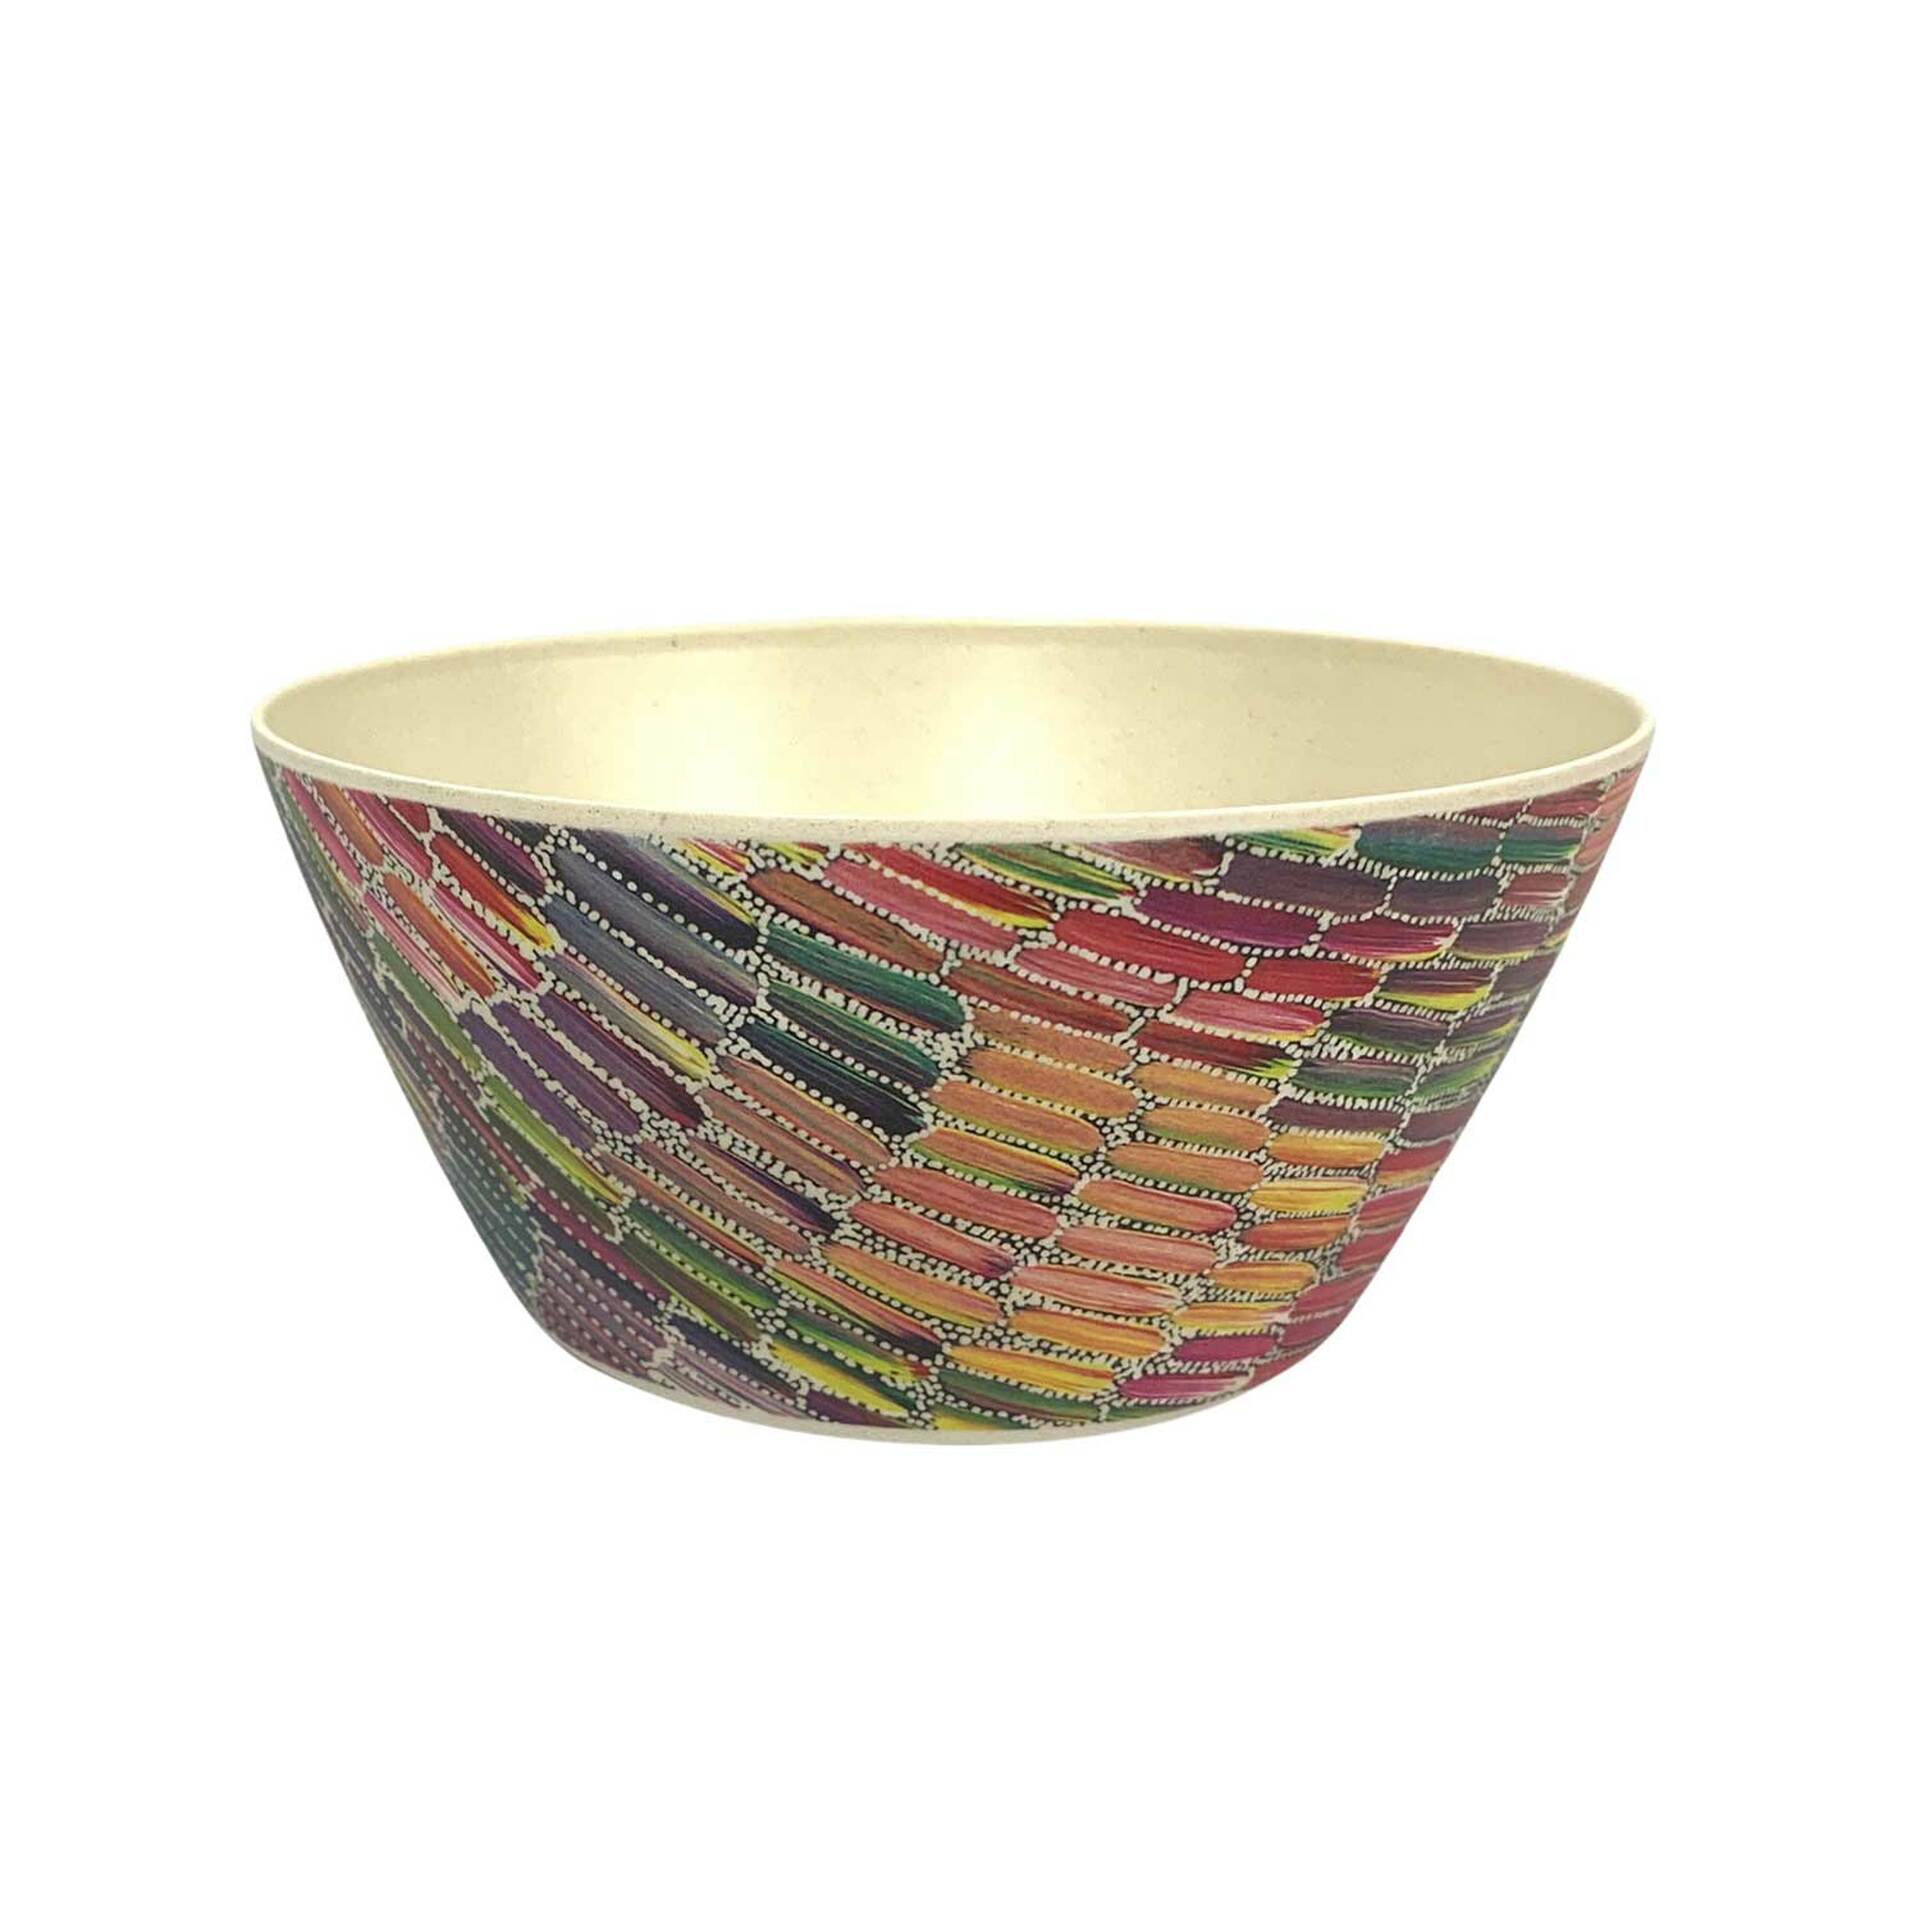 Bamboo Bowls - Jeannie Mills Pwerle